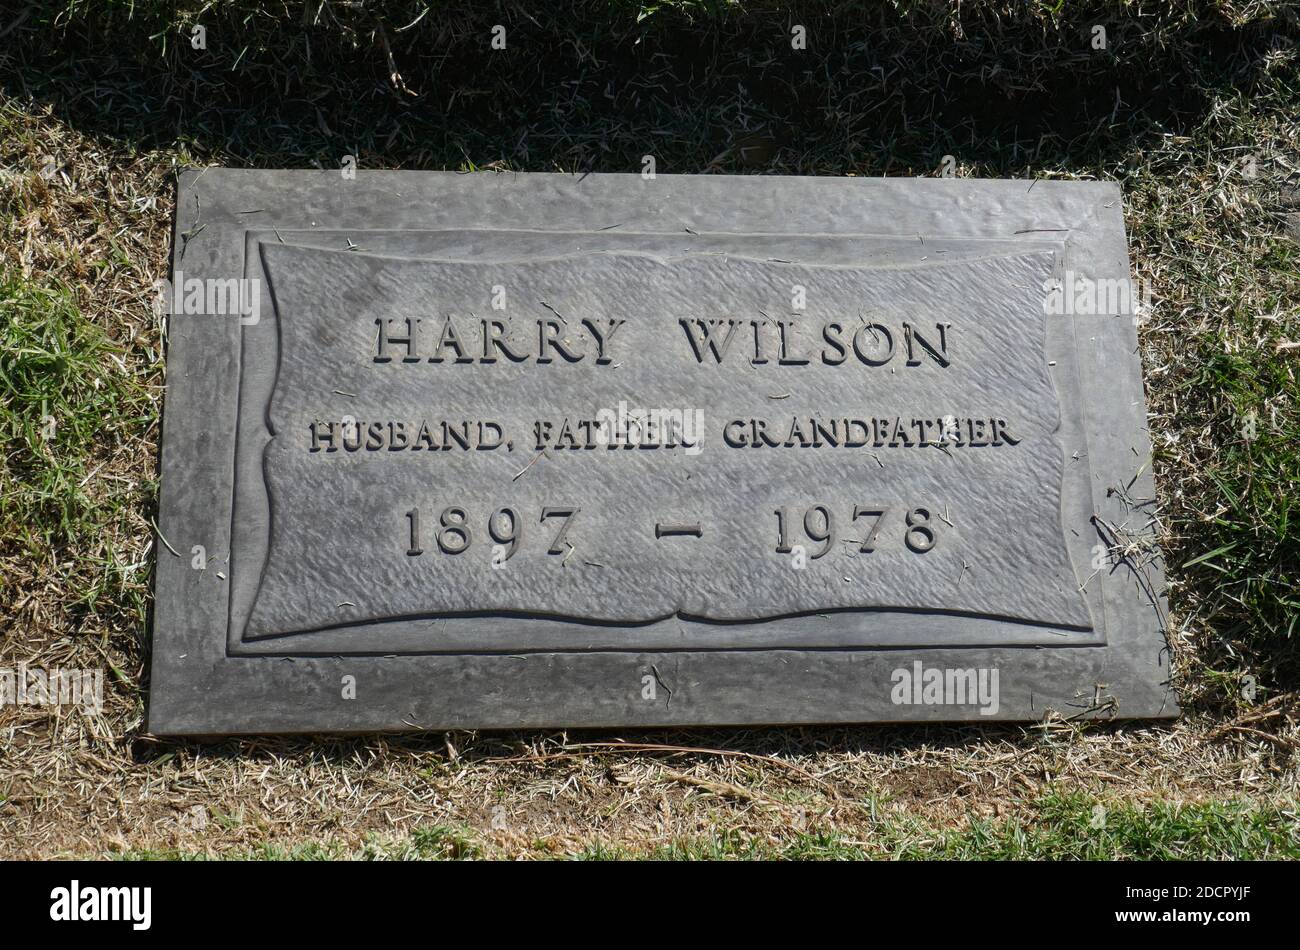 Los Angeles, California, USA 17th November 2020 A general view of atmosphere of actor Harry Wilson's Grave at Mount Sinai Cemetery Hollywood Hills on November 17, 2020 in Los Angeles, California, USA. Photo by Barry King/Alamy Stock Photo Stock Photo